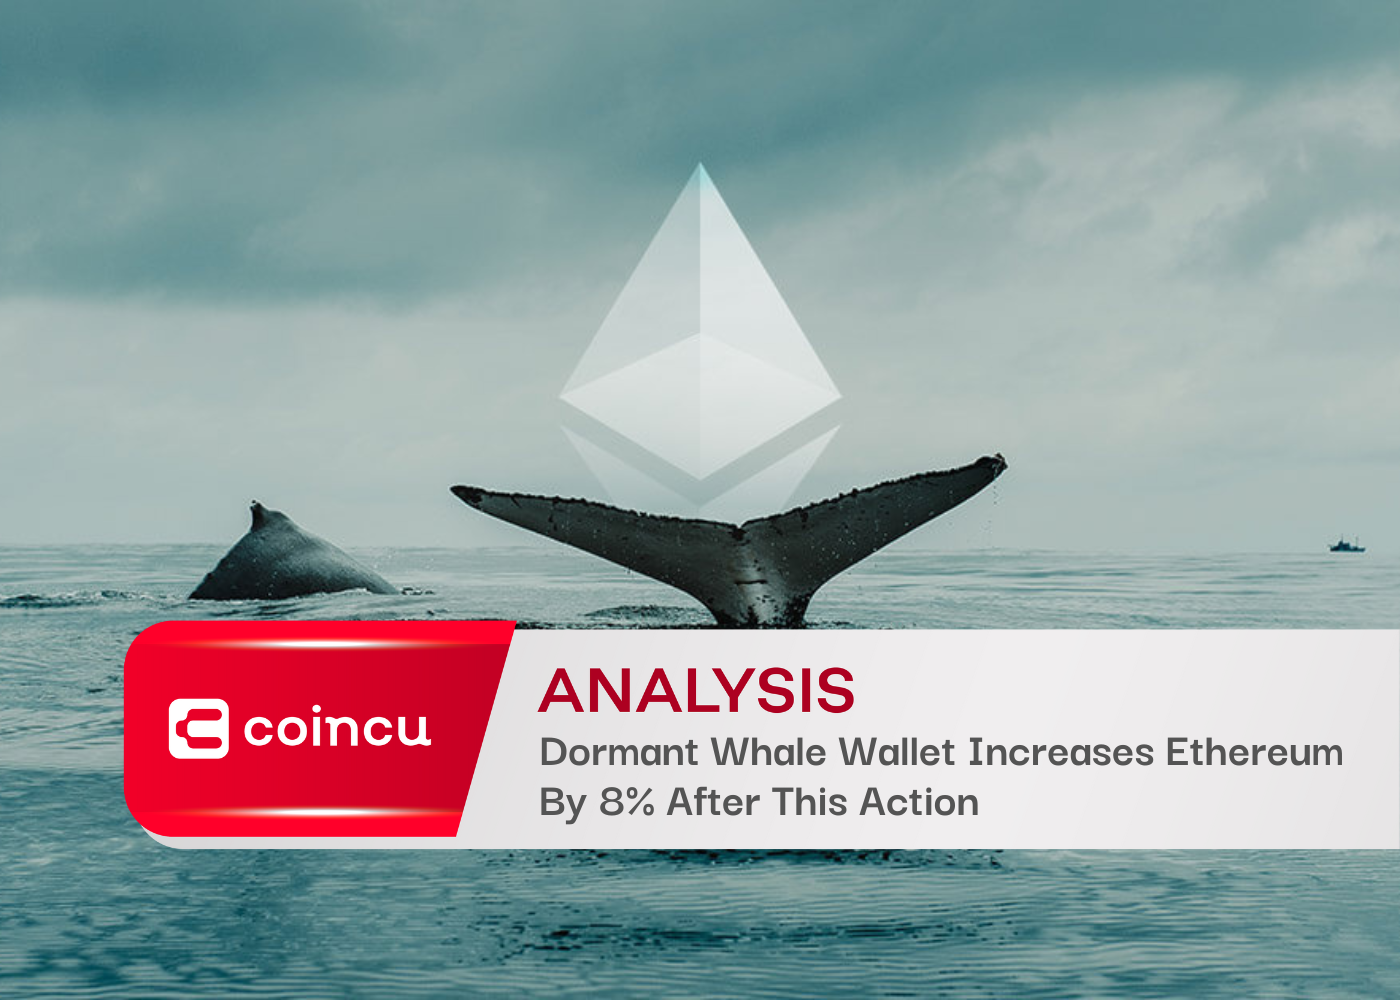 Dormant Whale Wallet Increases Ethereum By 8